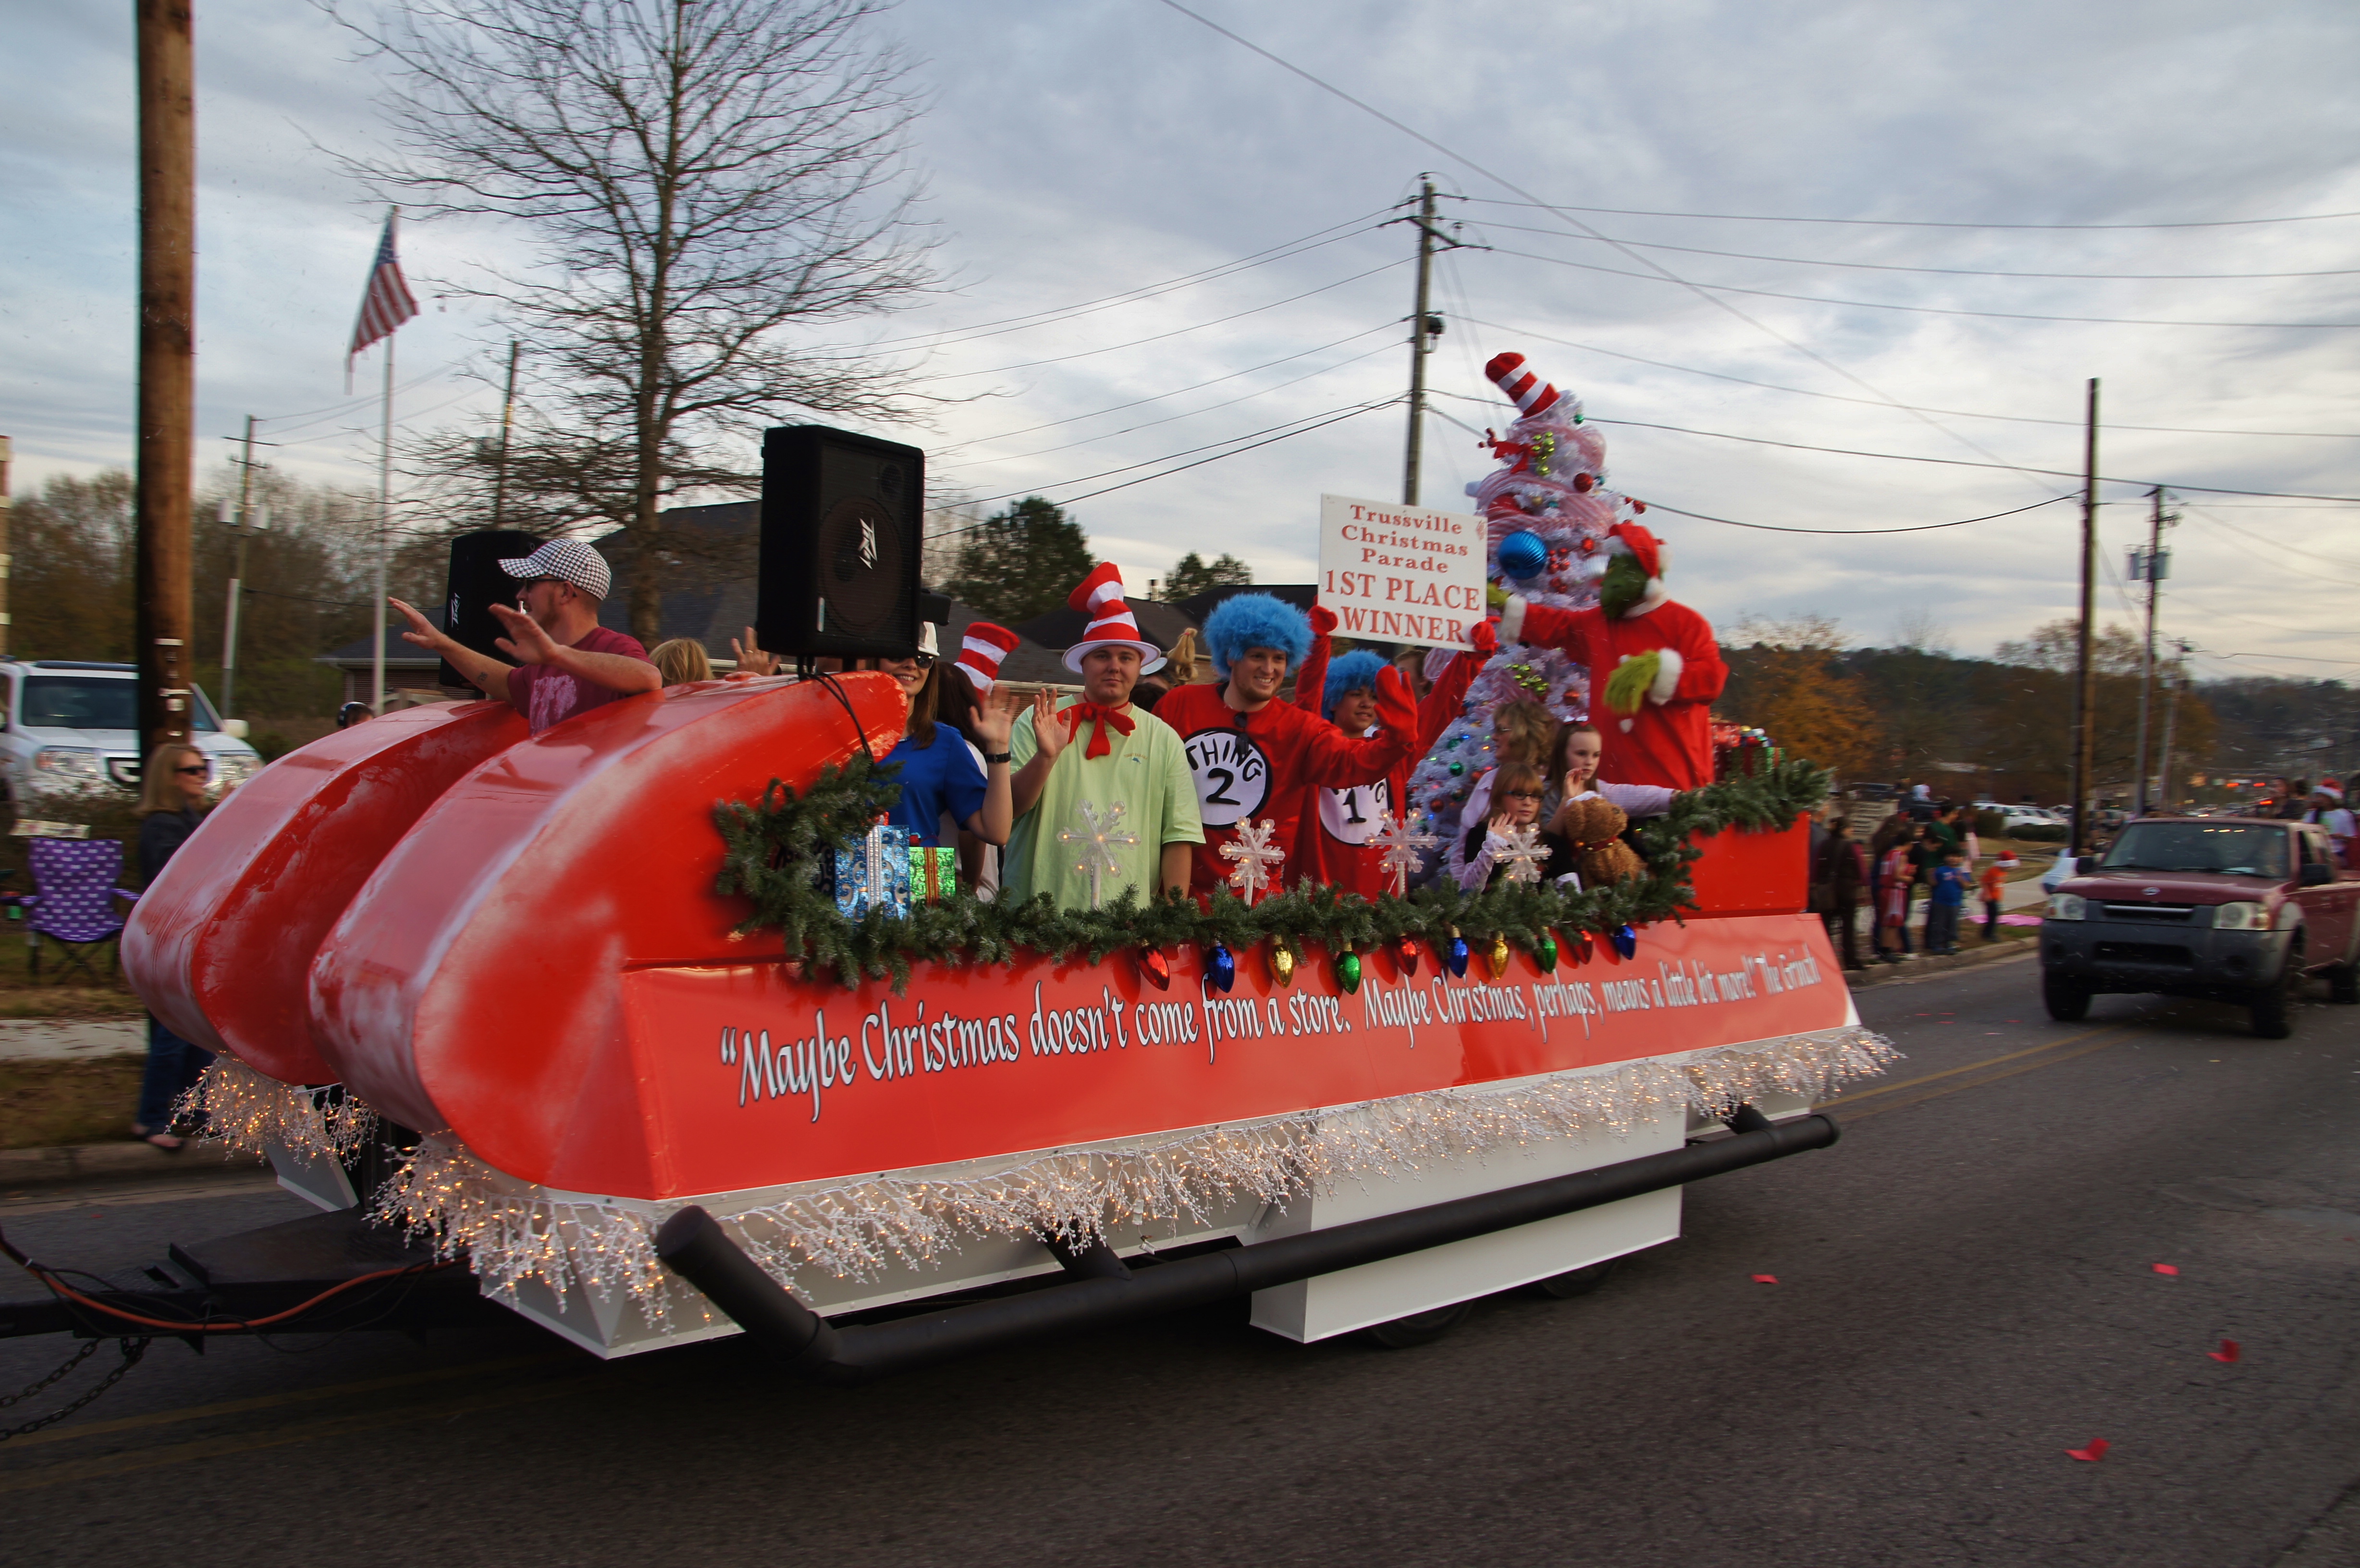 Trussville's Christmas parade starts at 3 p.m.; here's what you need to know